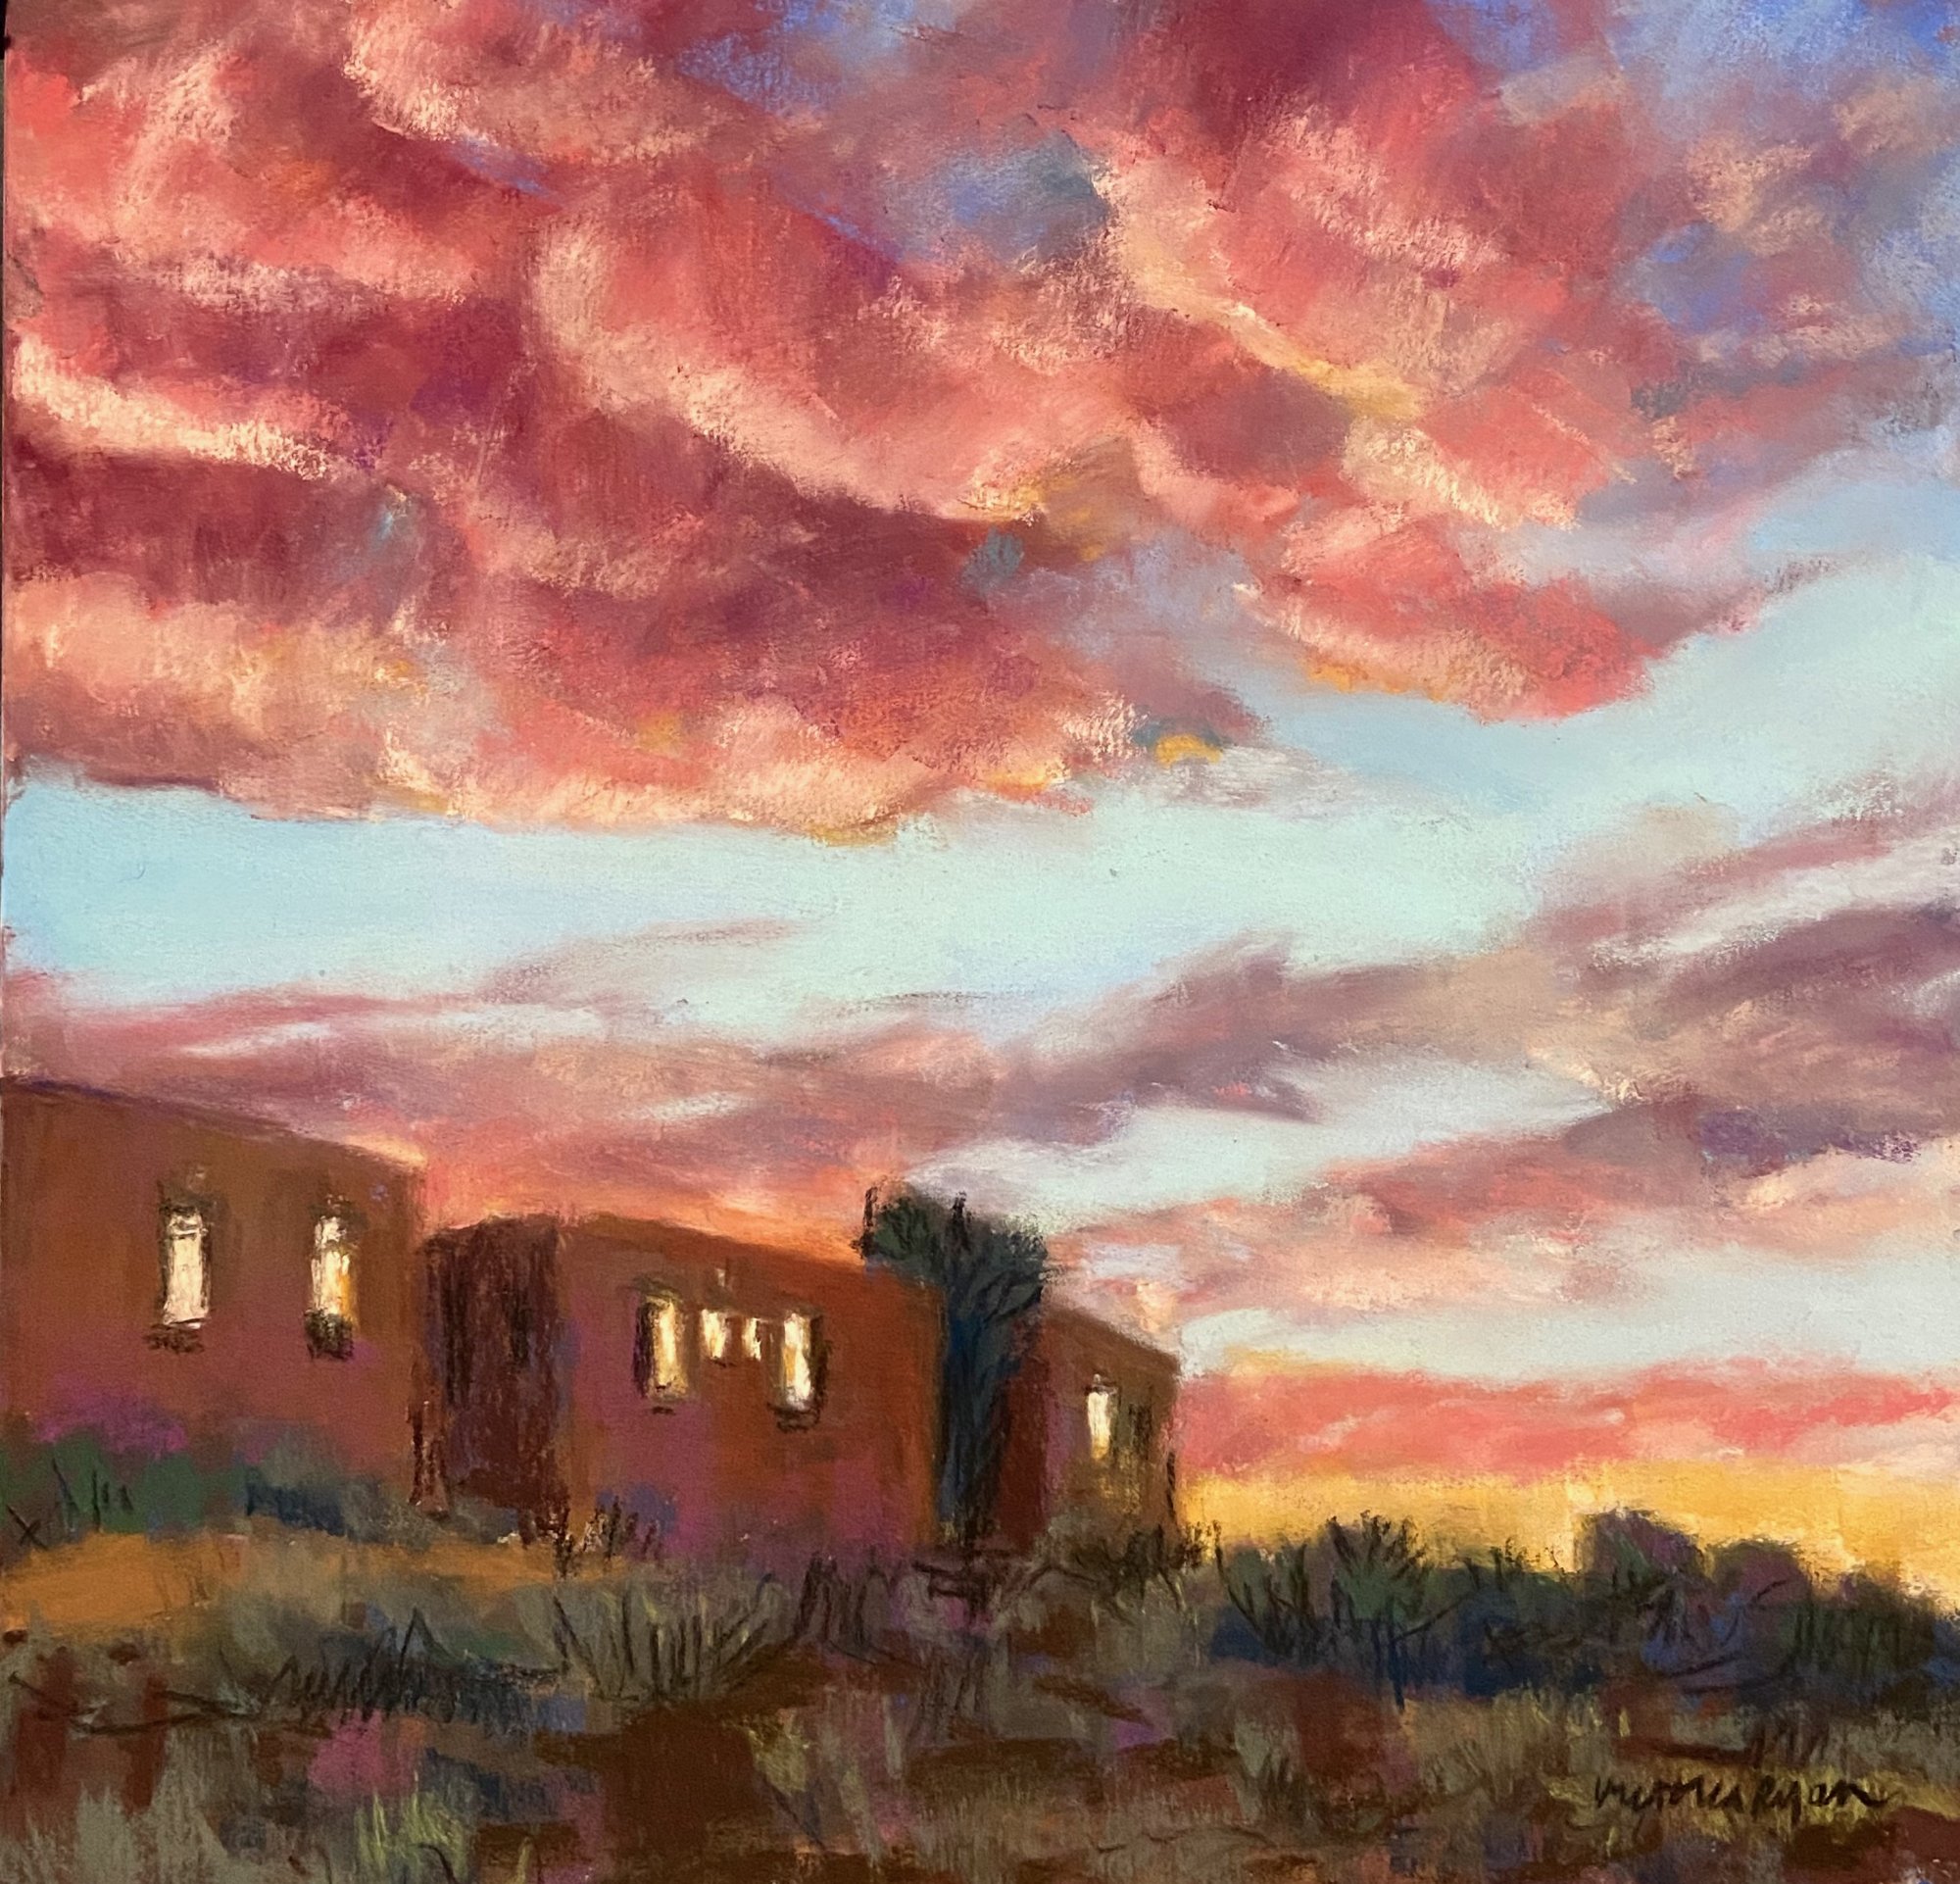 “When Evening Comes” 13x13” Pastel